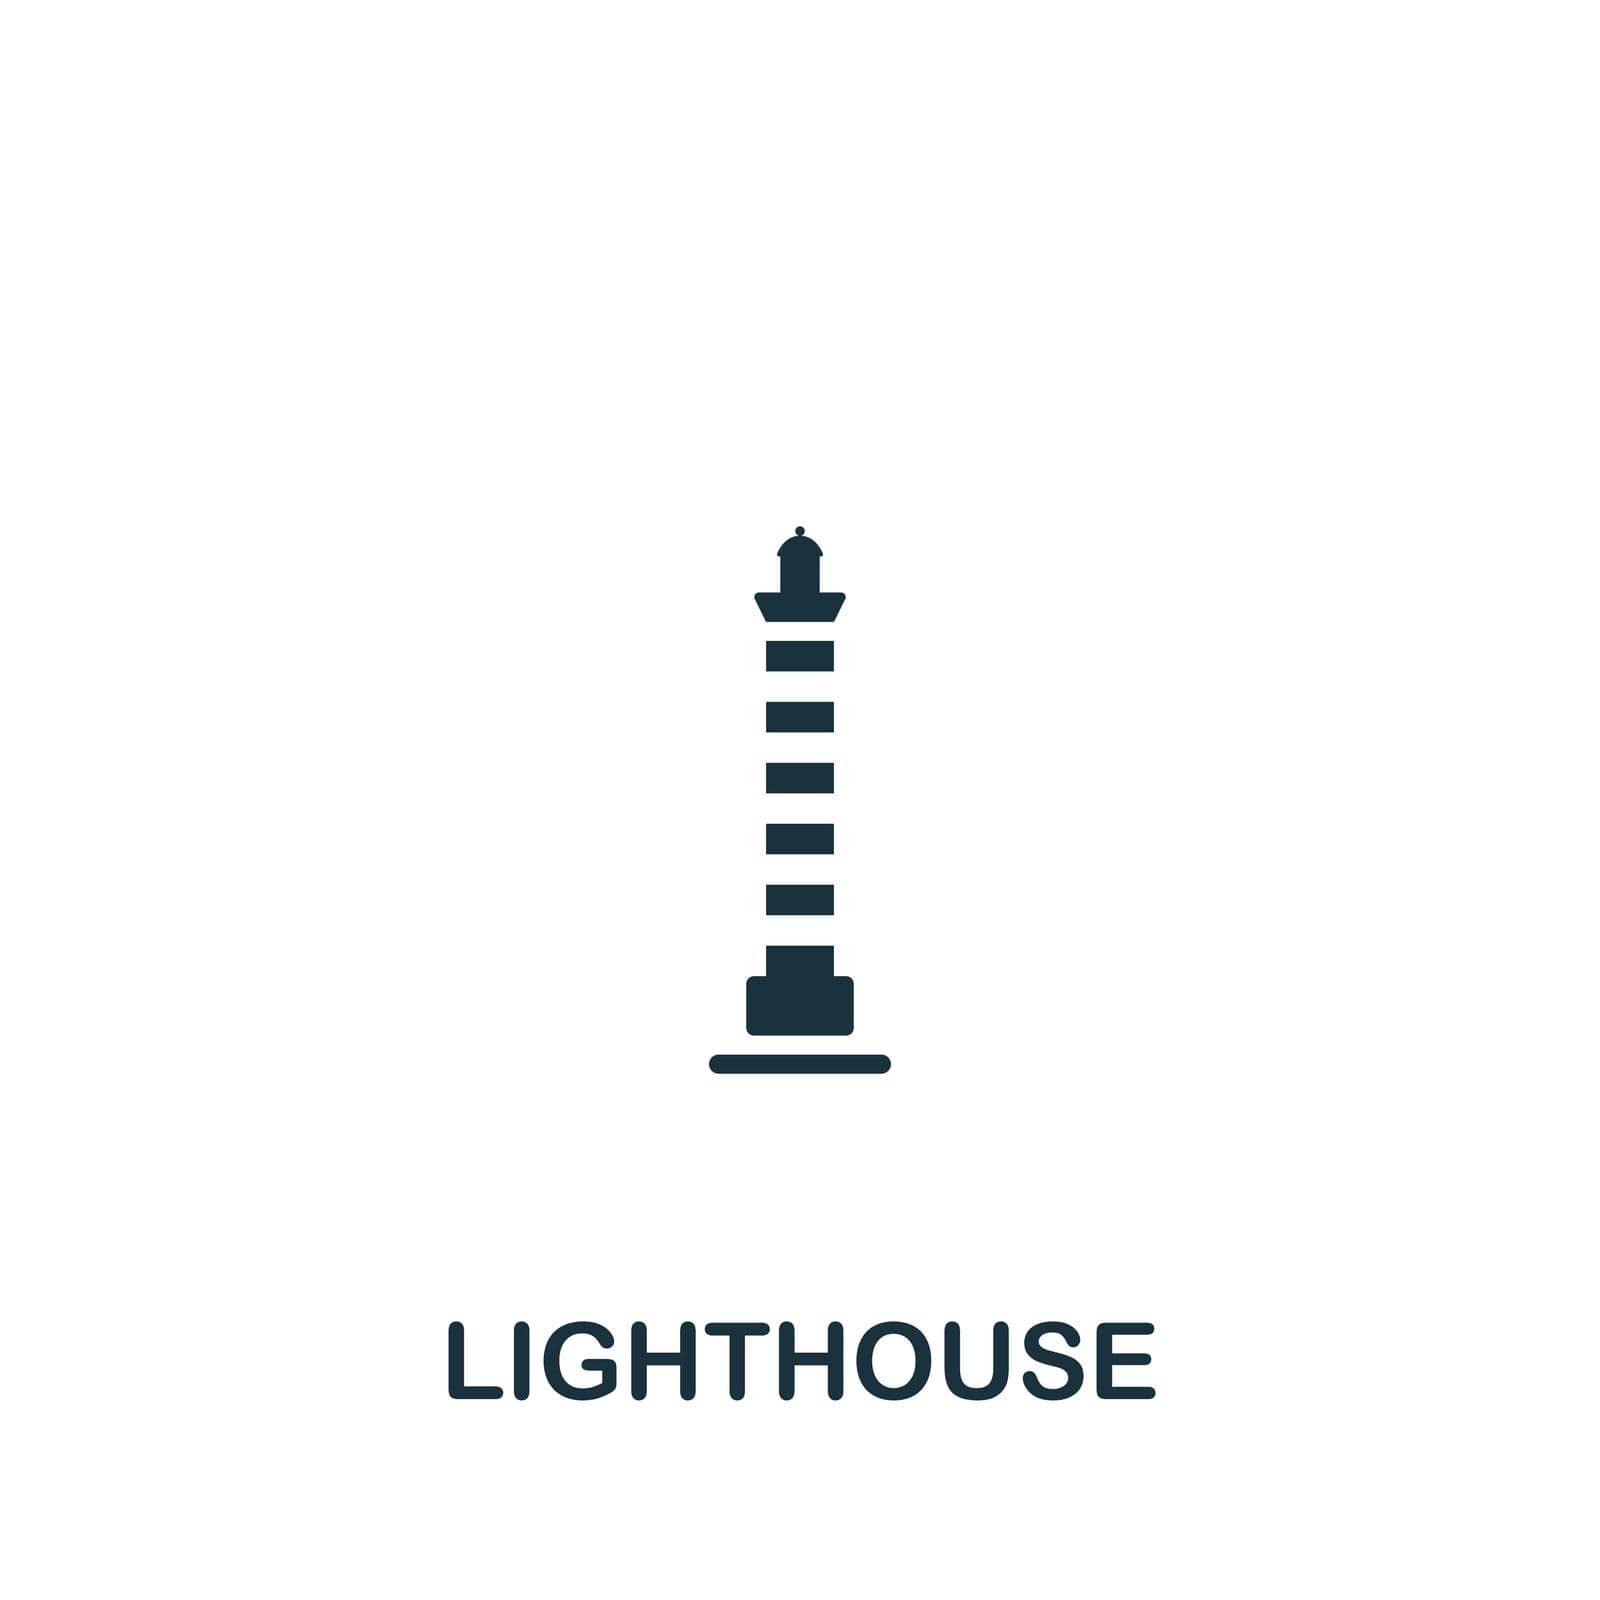 Lighthouse icon. Monochrome simple icon for templates, web design and infographics by simakovavector